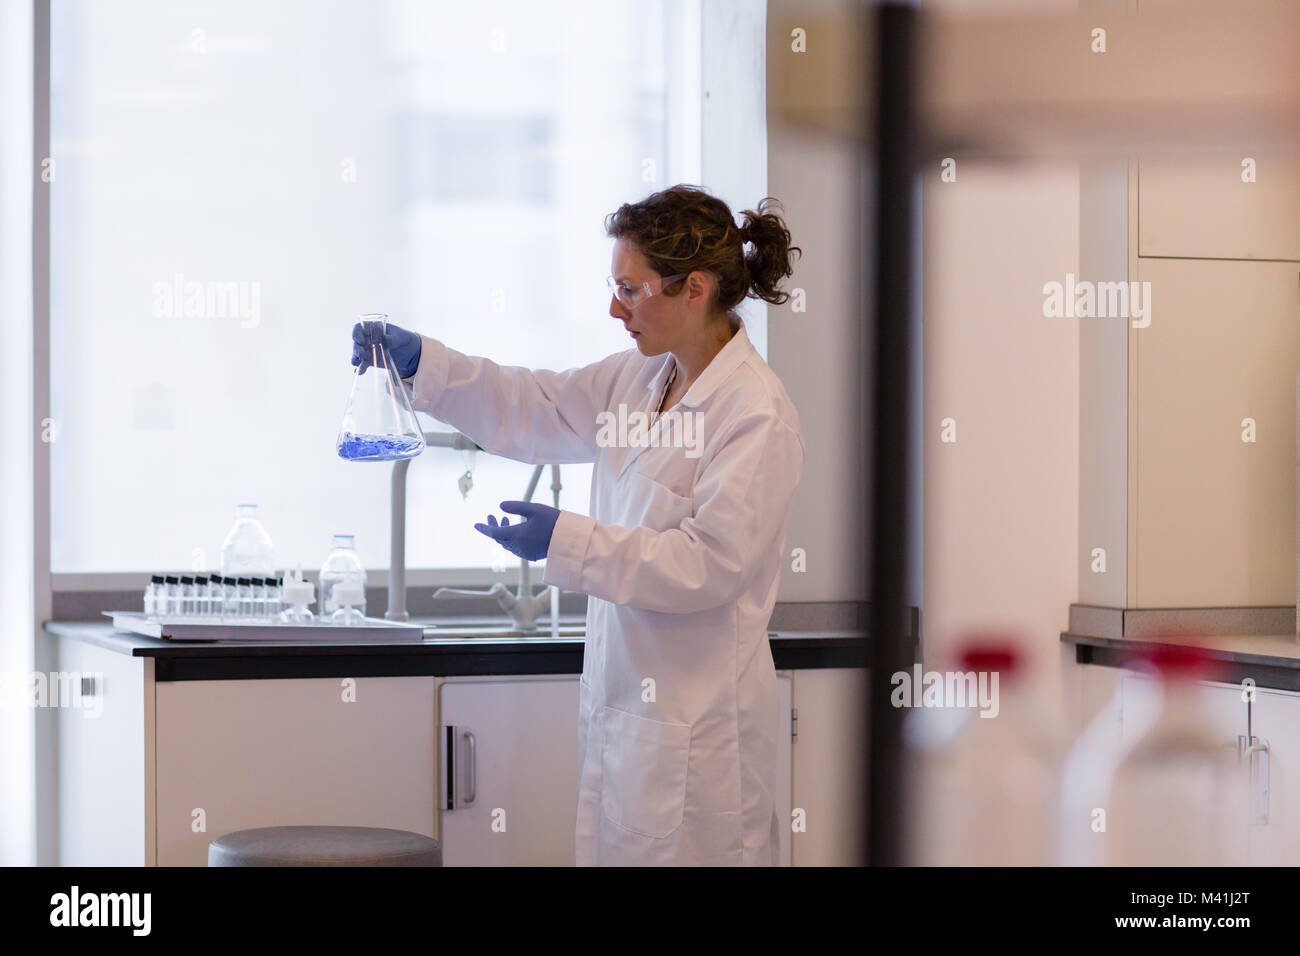 Female scientist working in a science laboratory Stock Photo